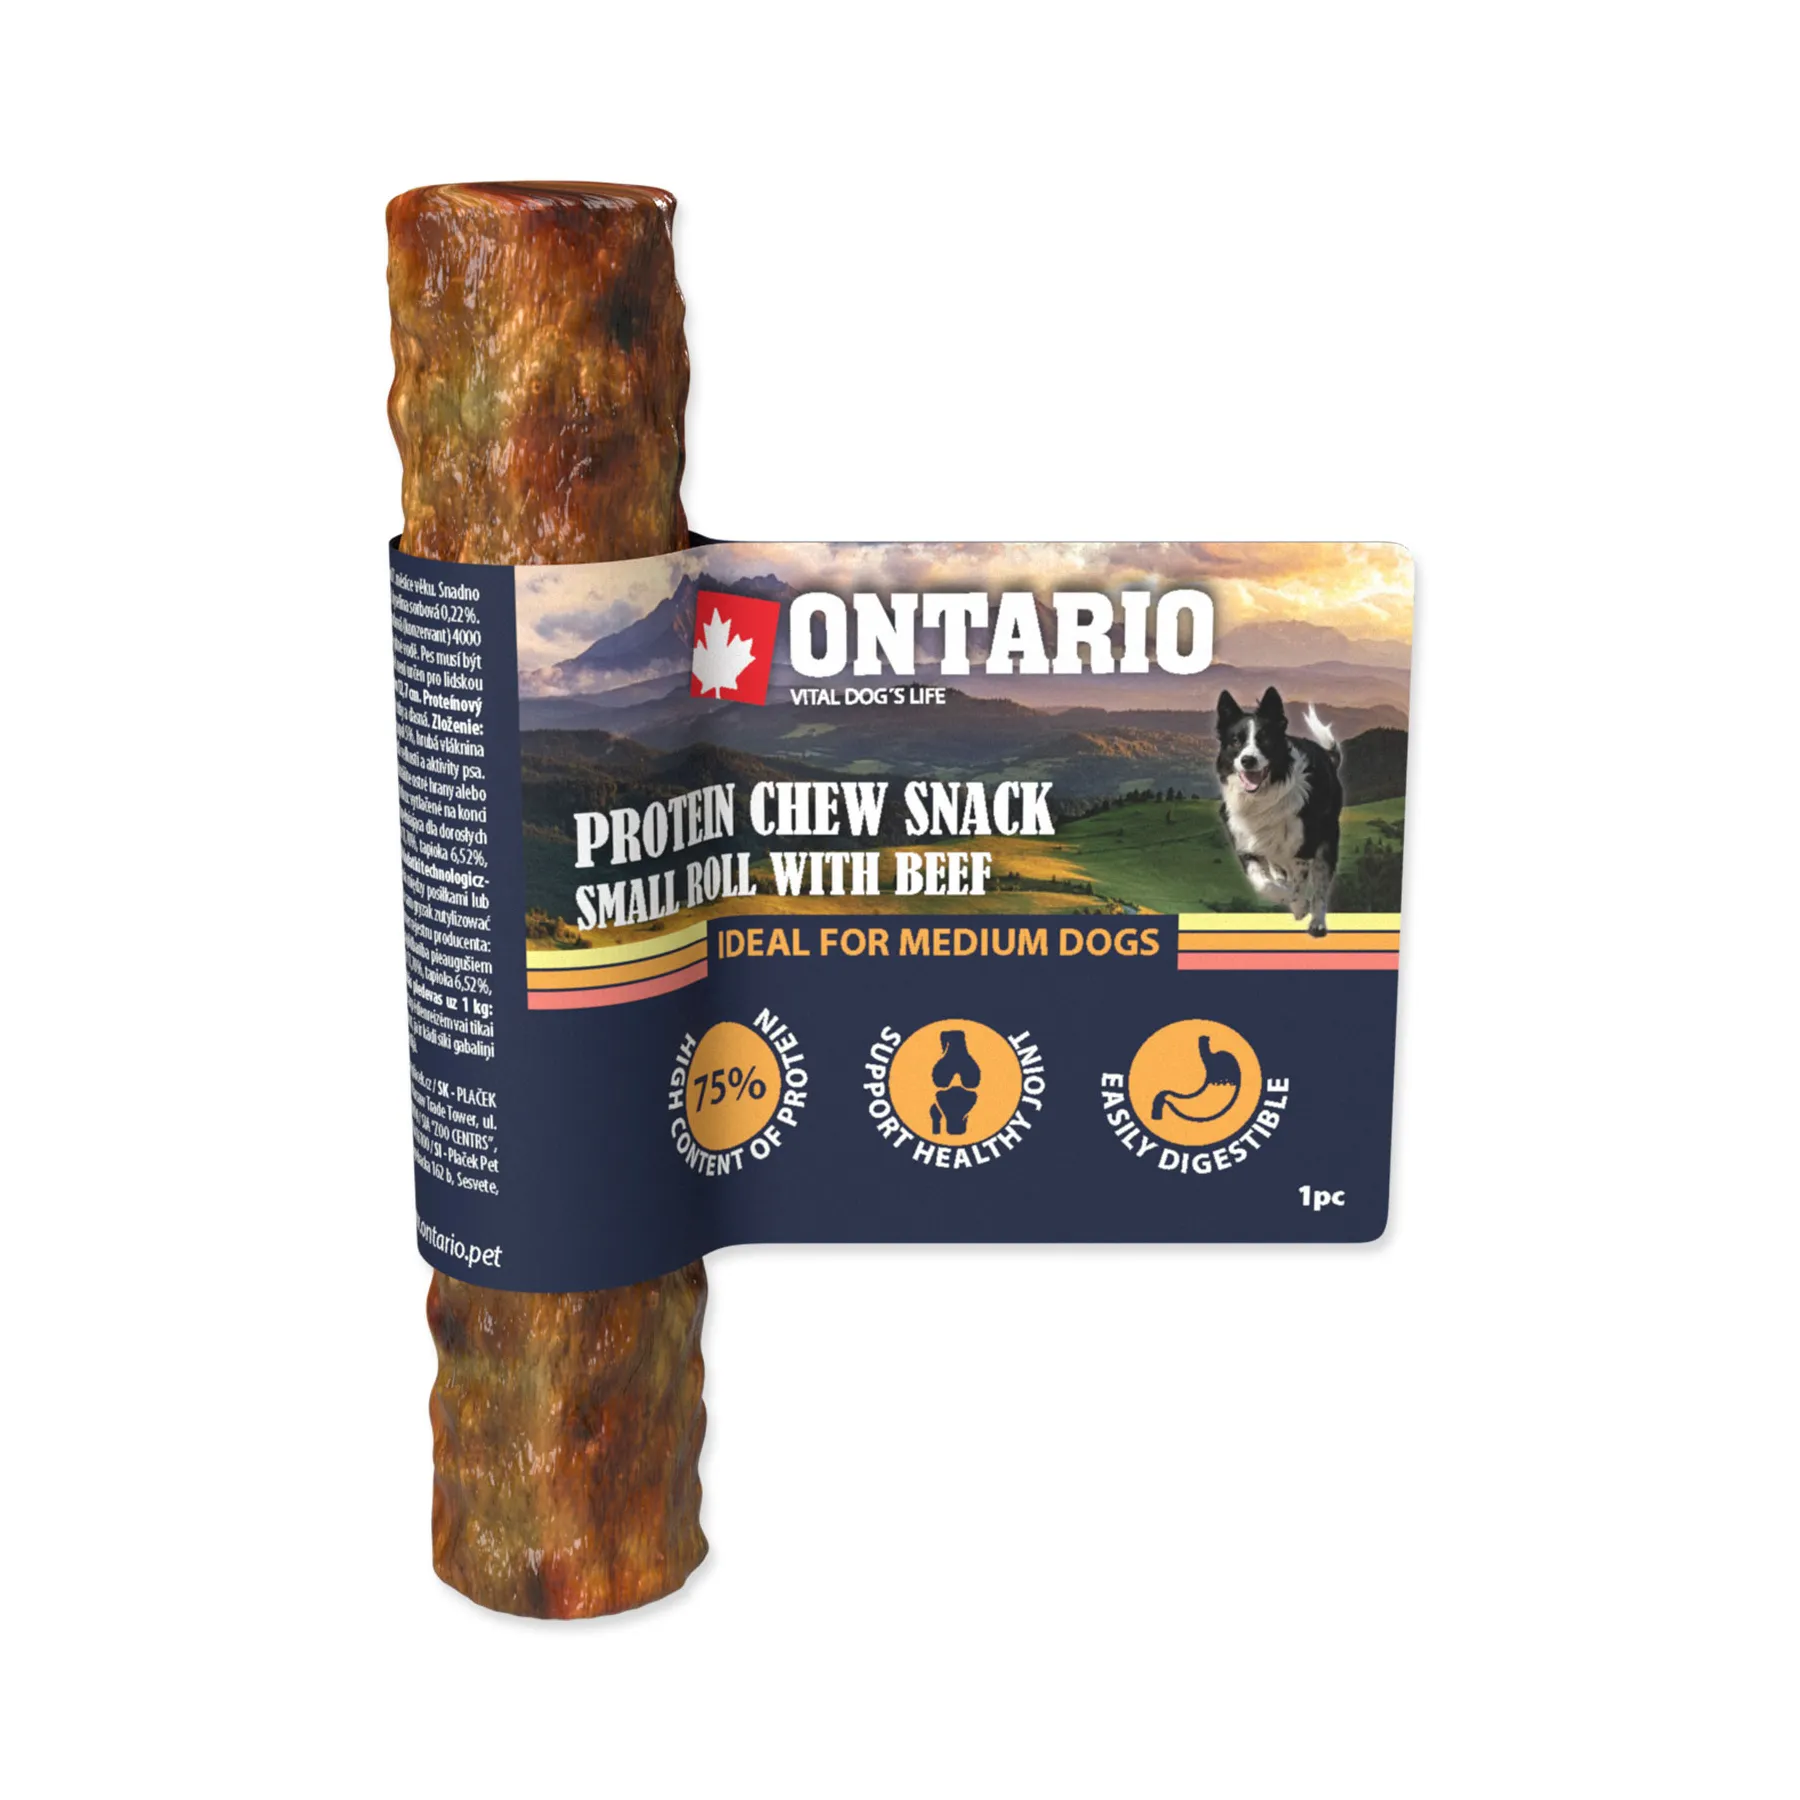 Ontario Protein Chew Snack Small Roll with Beef